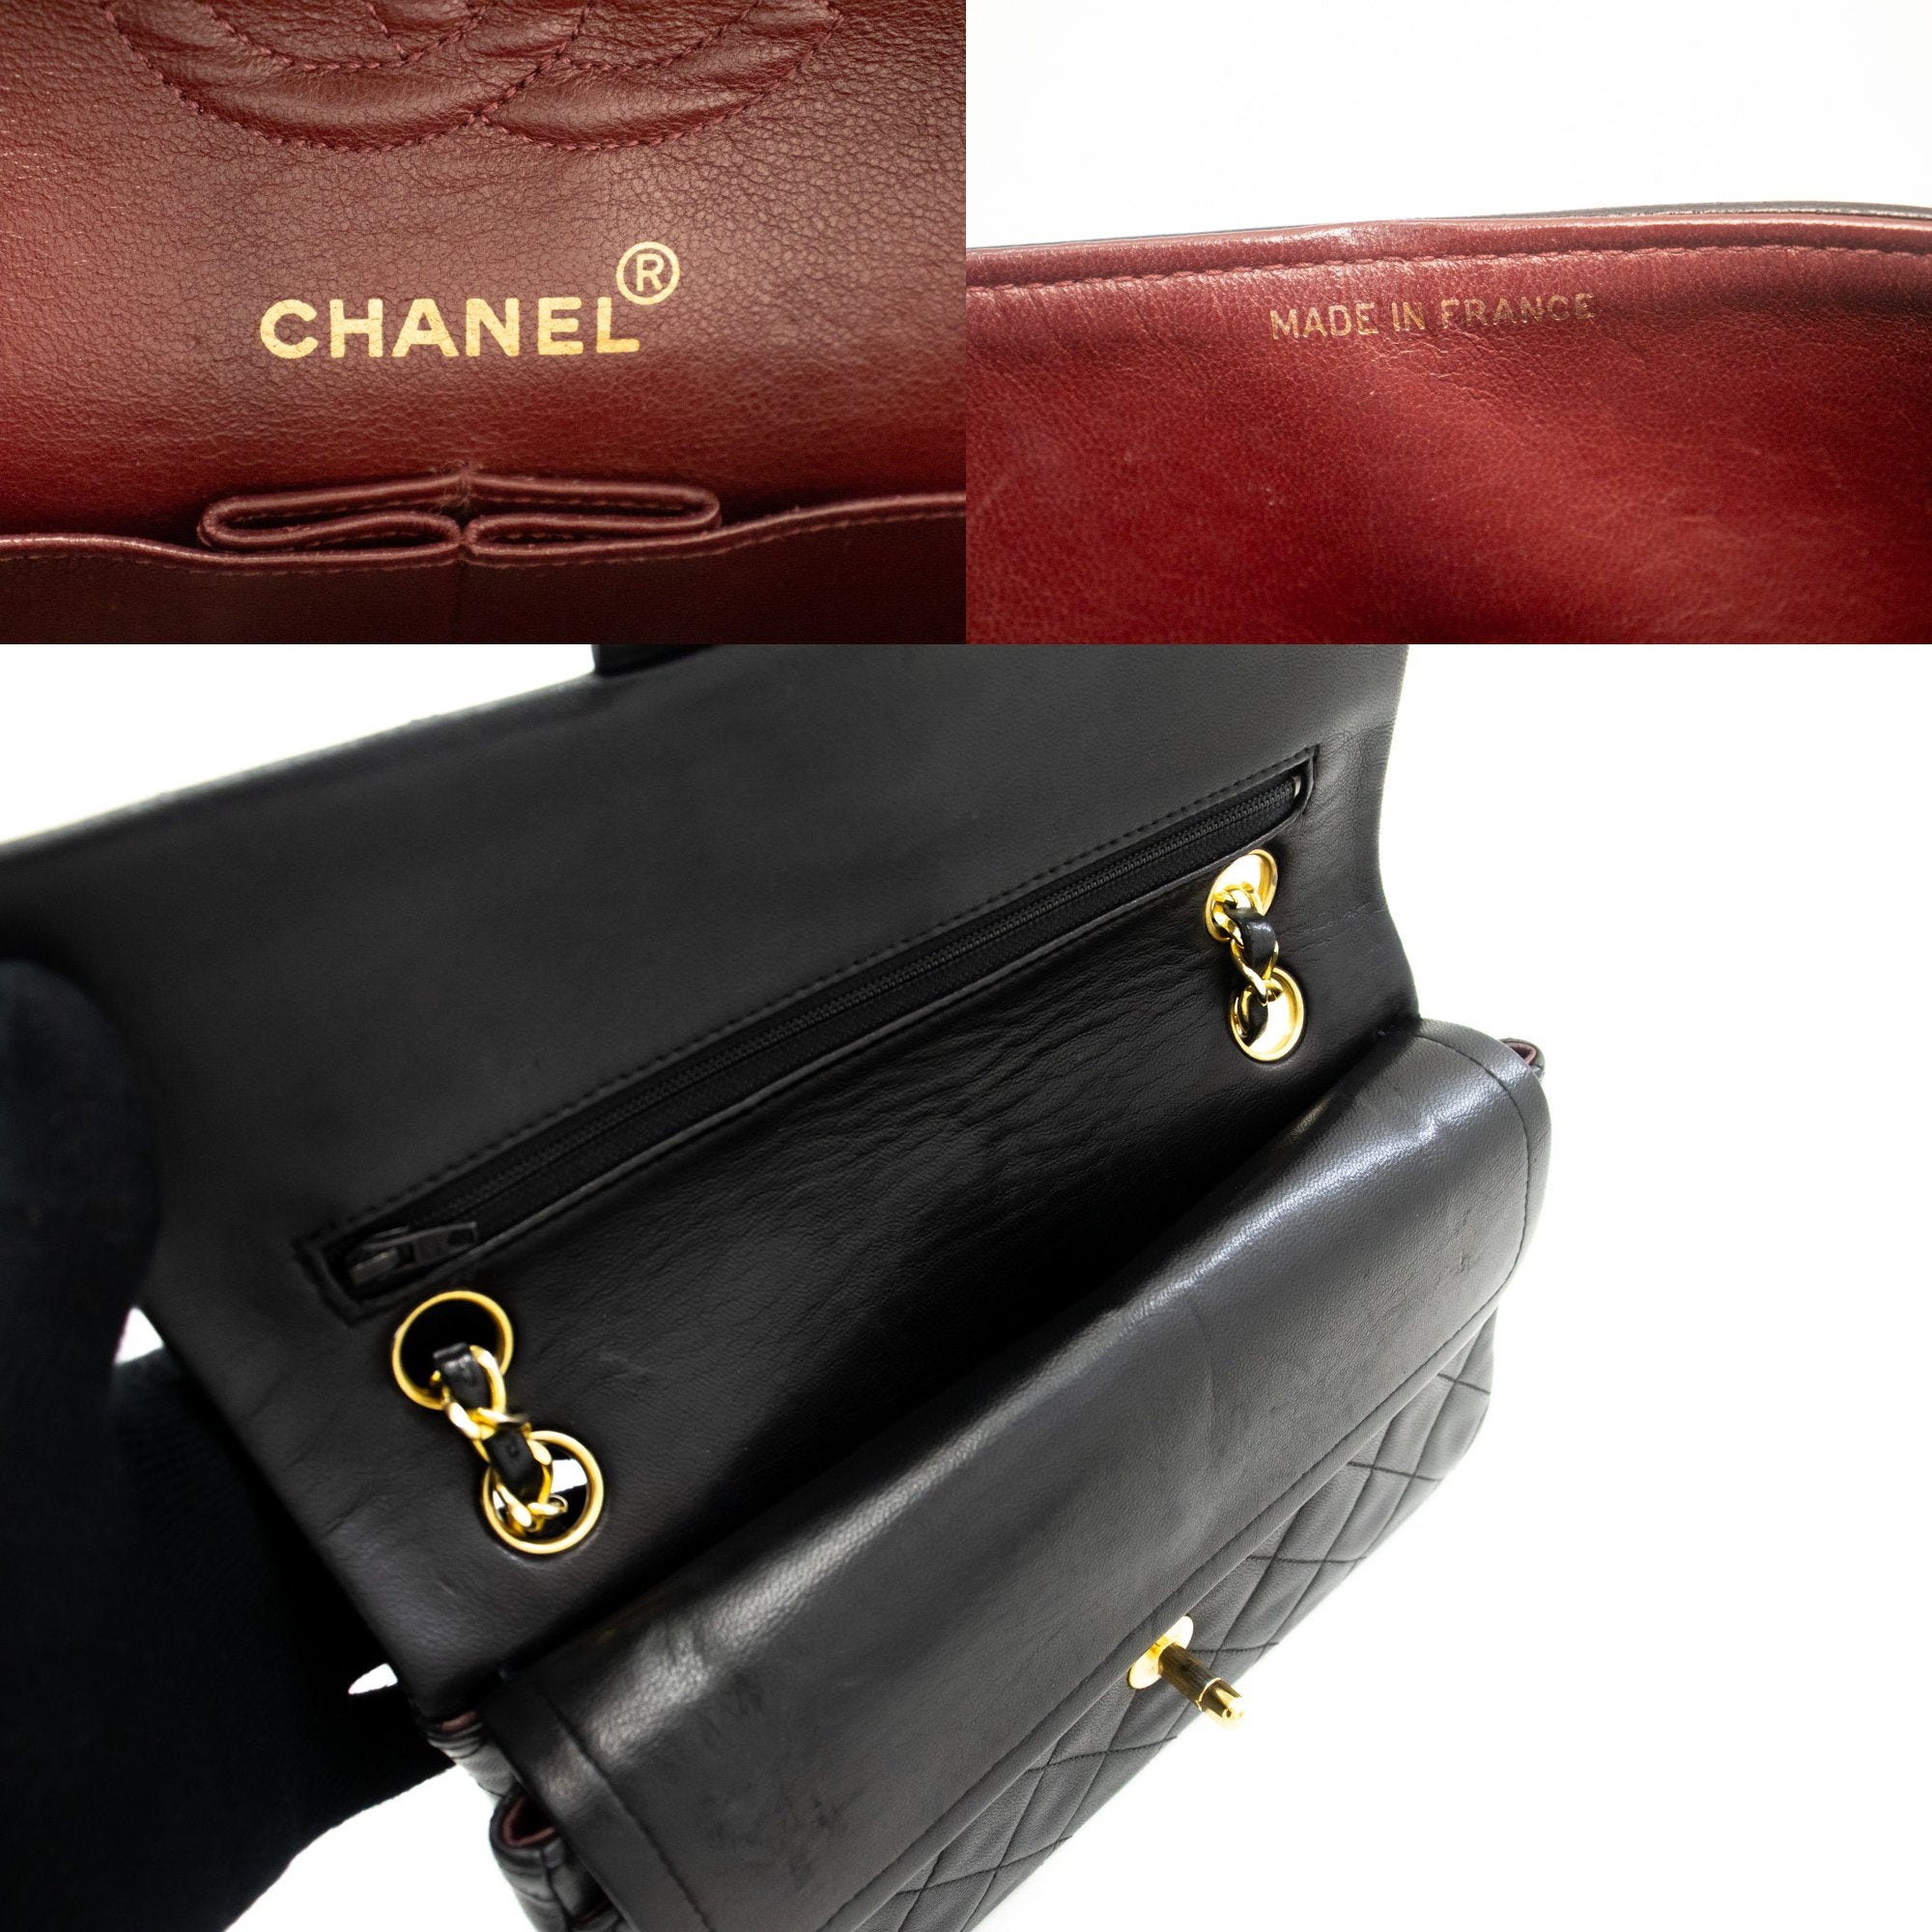 chanel red leather bag